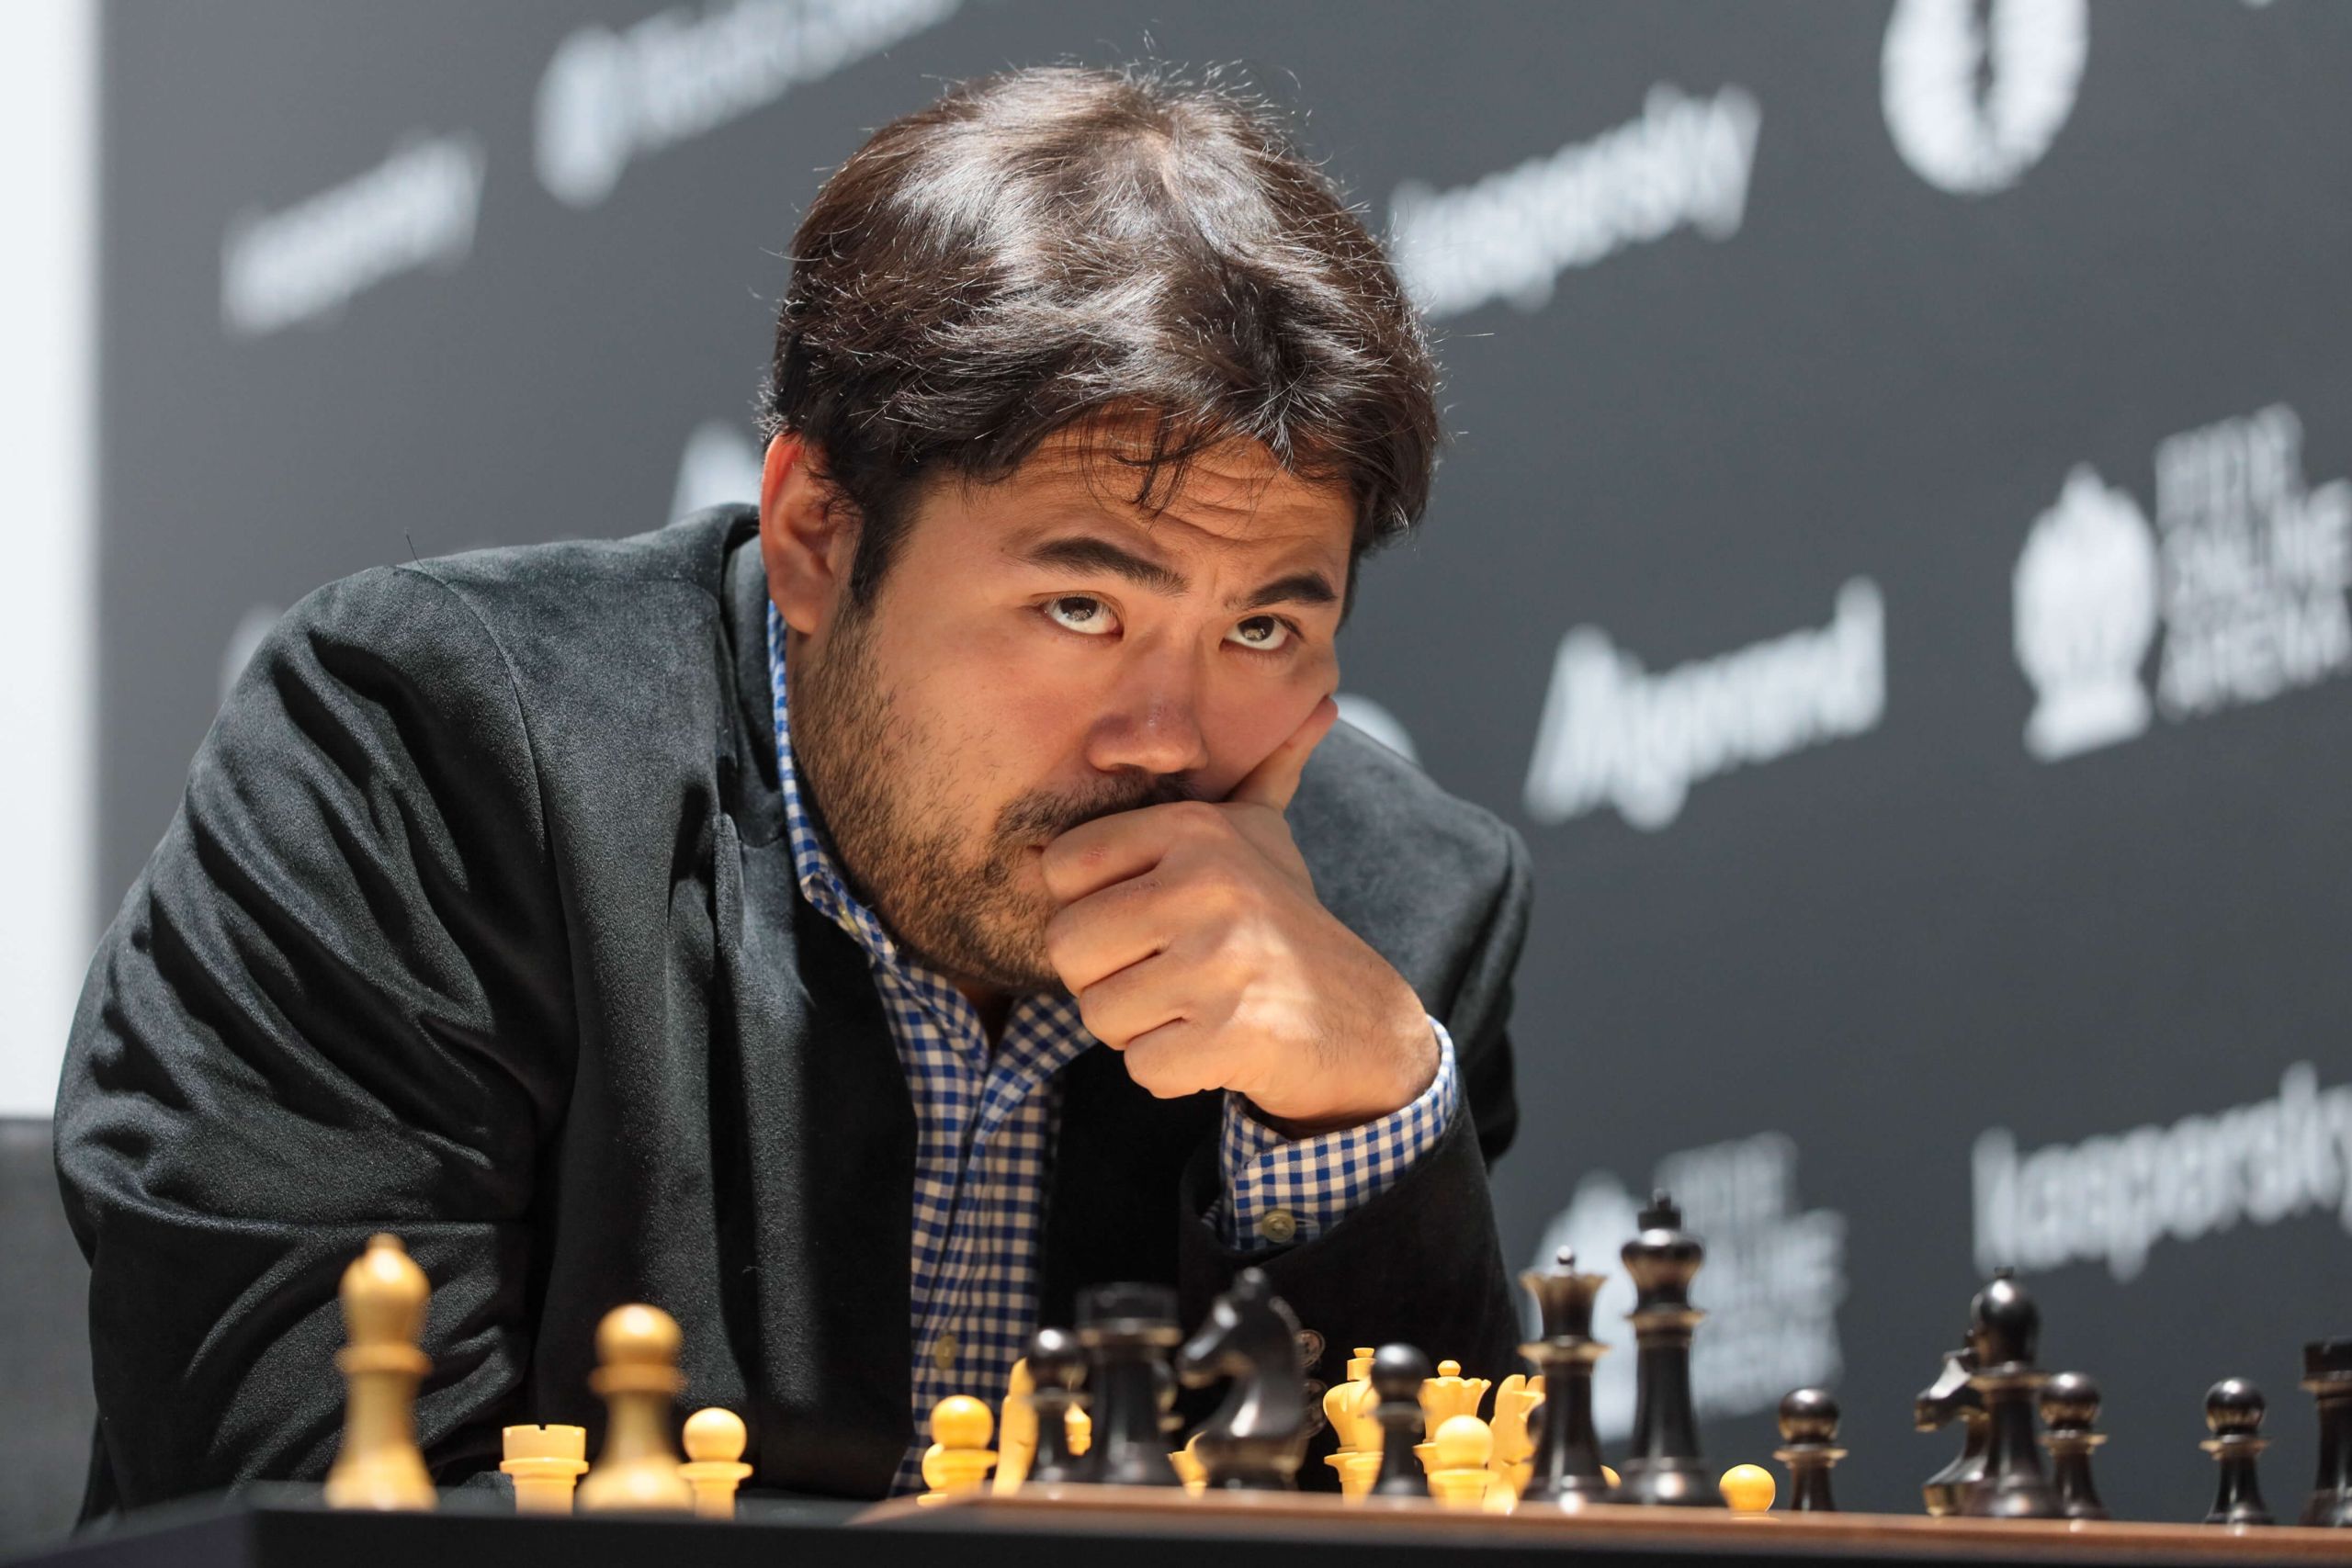 Hikaru Nakamura and Richard Rapport after the first semi-final of